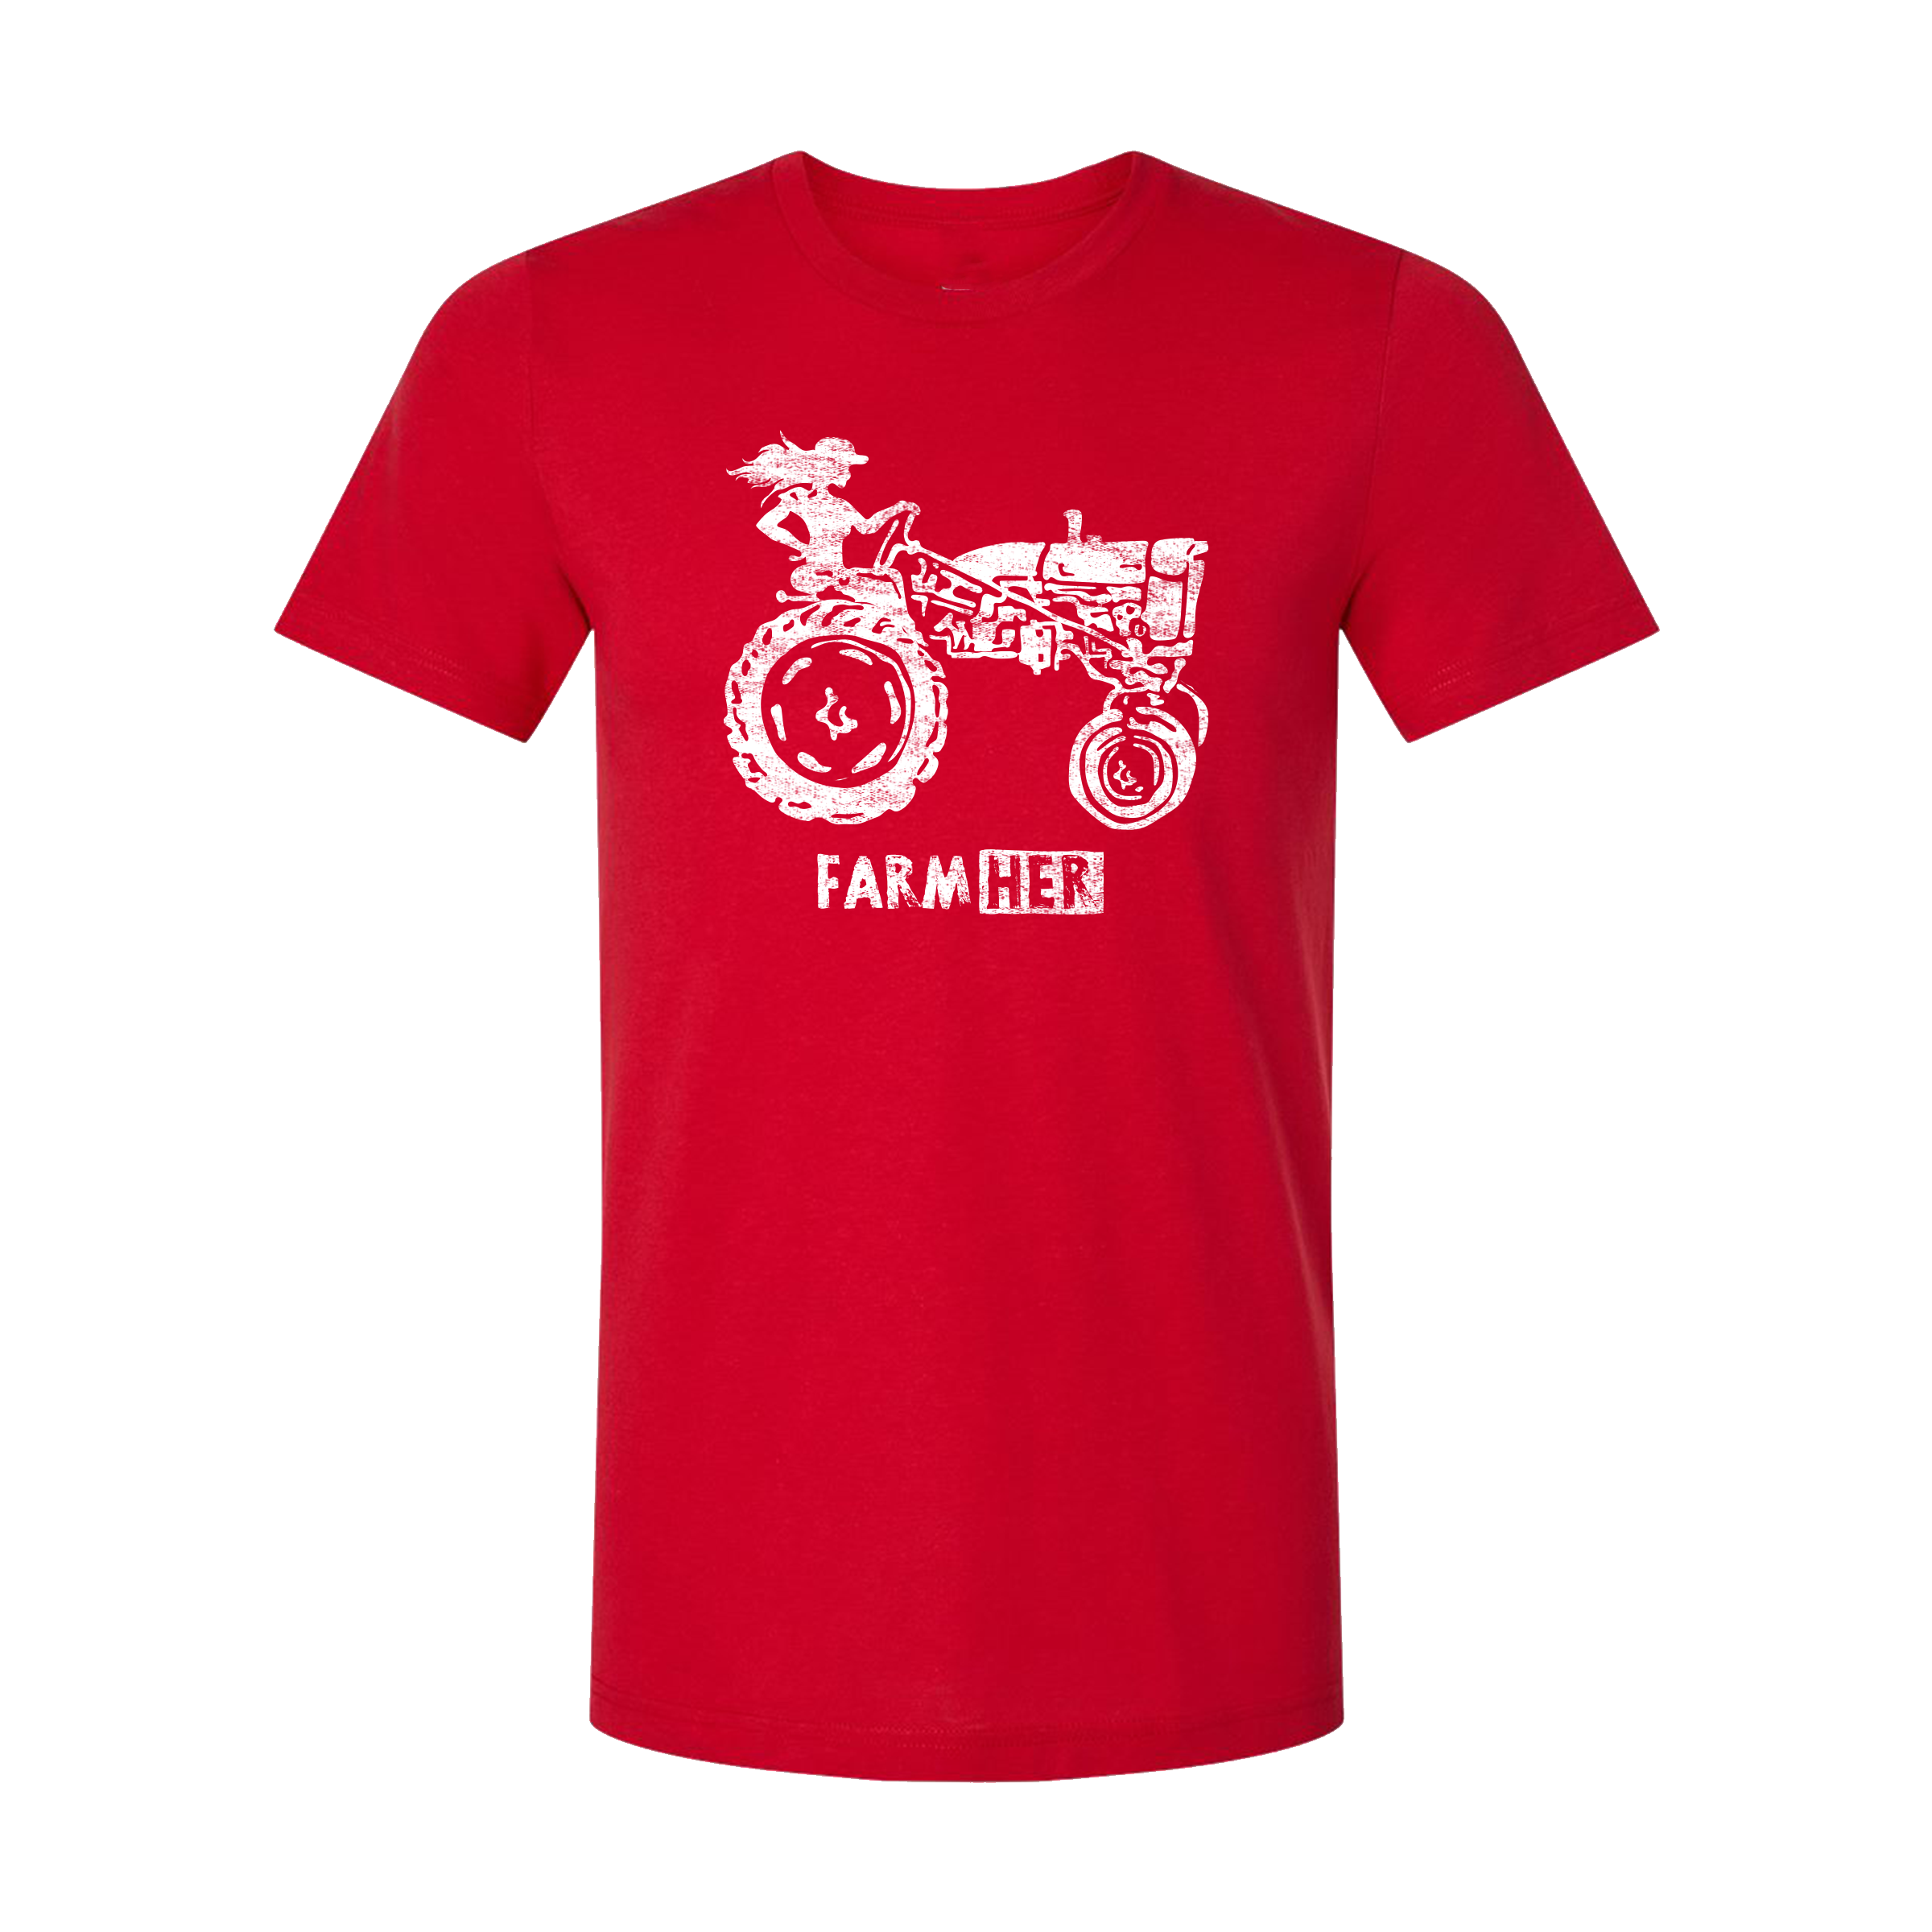 "Tractor Girl" FarmHer Red Graphic Tee